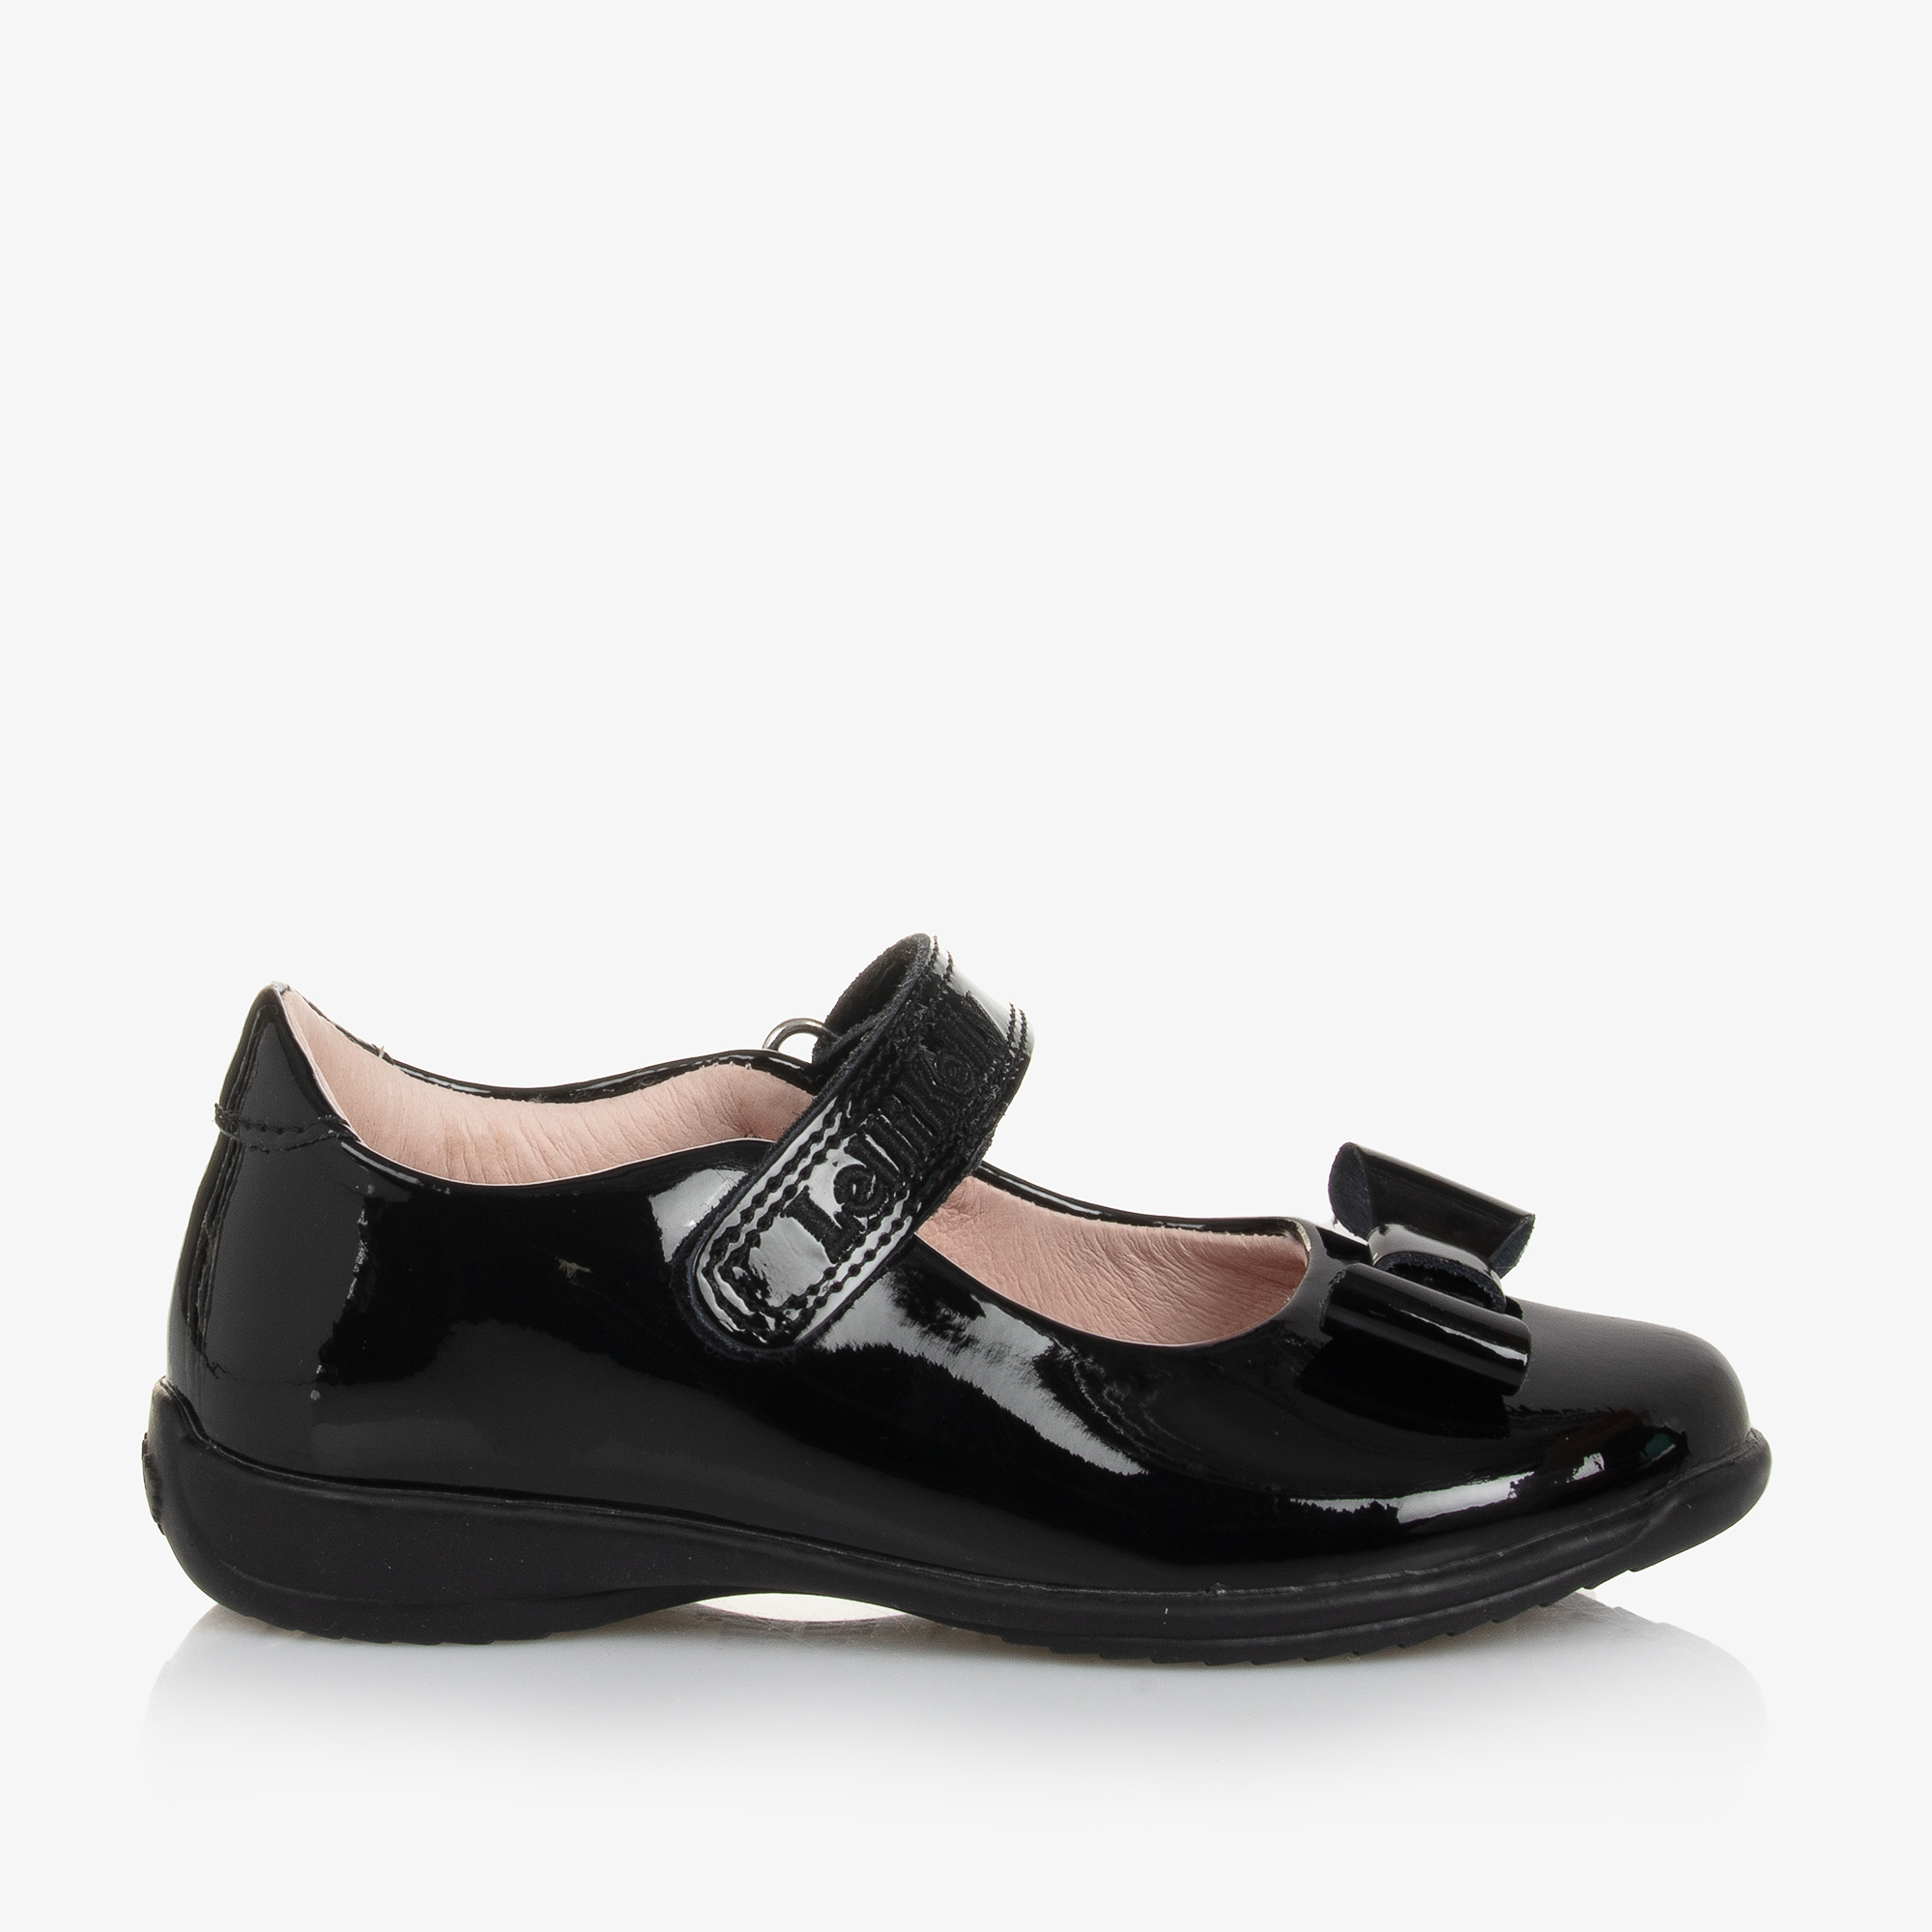 Children's Classics - Girls Patent Leather Shoes